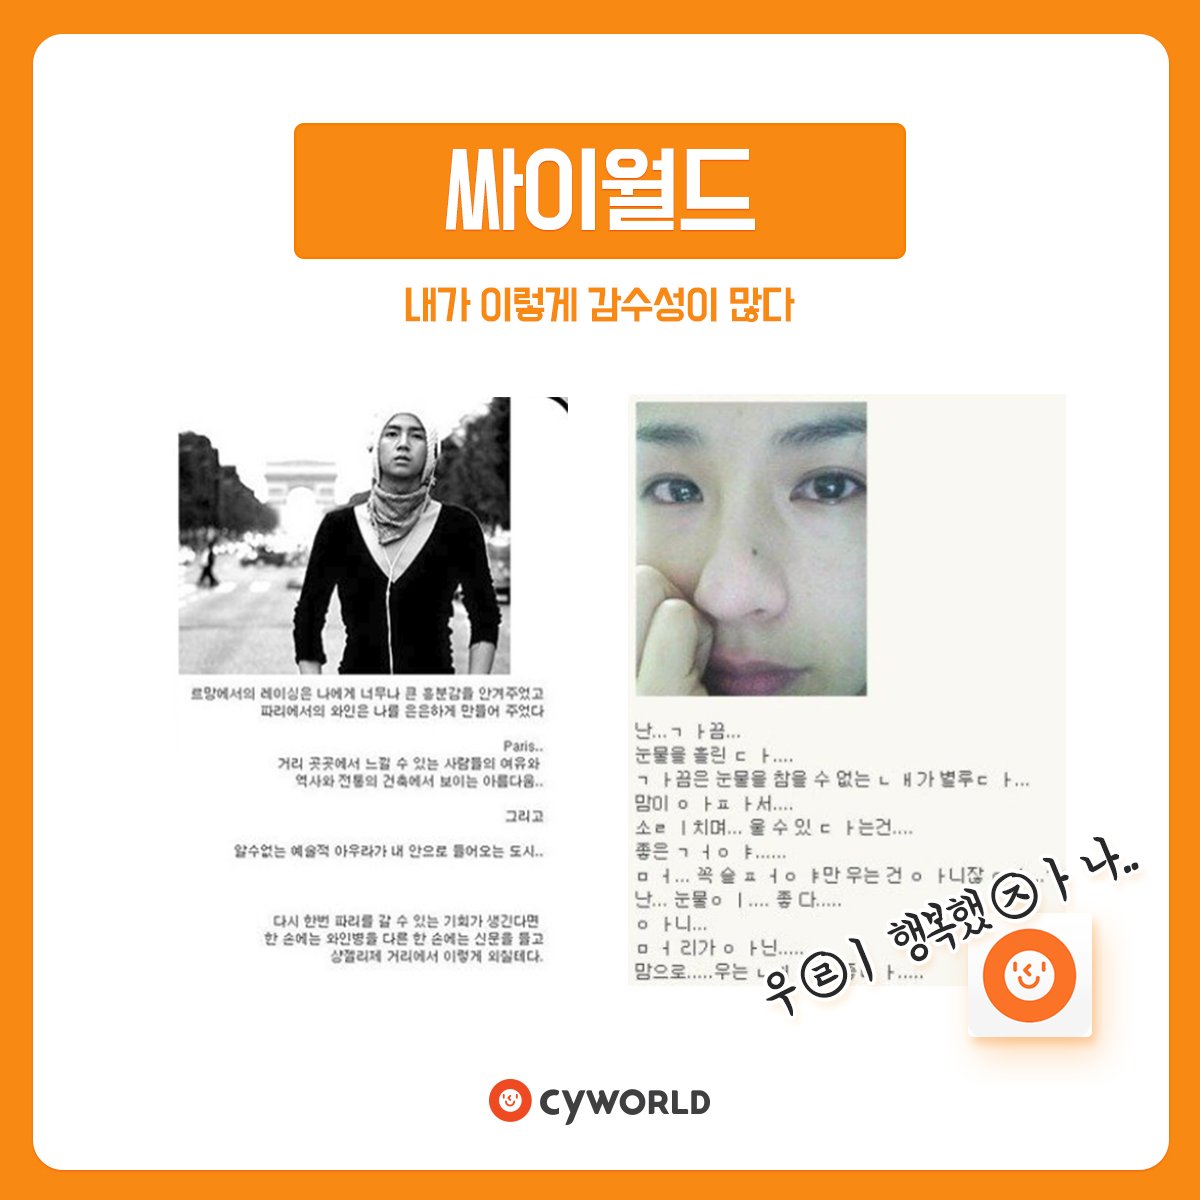 Corp_Cyworld tweet picture